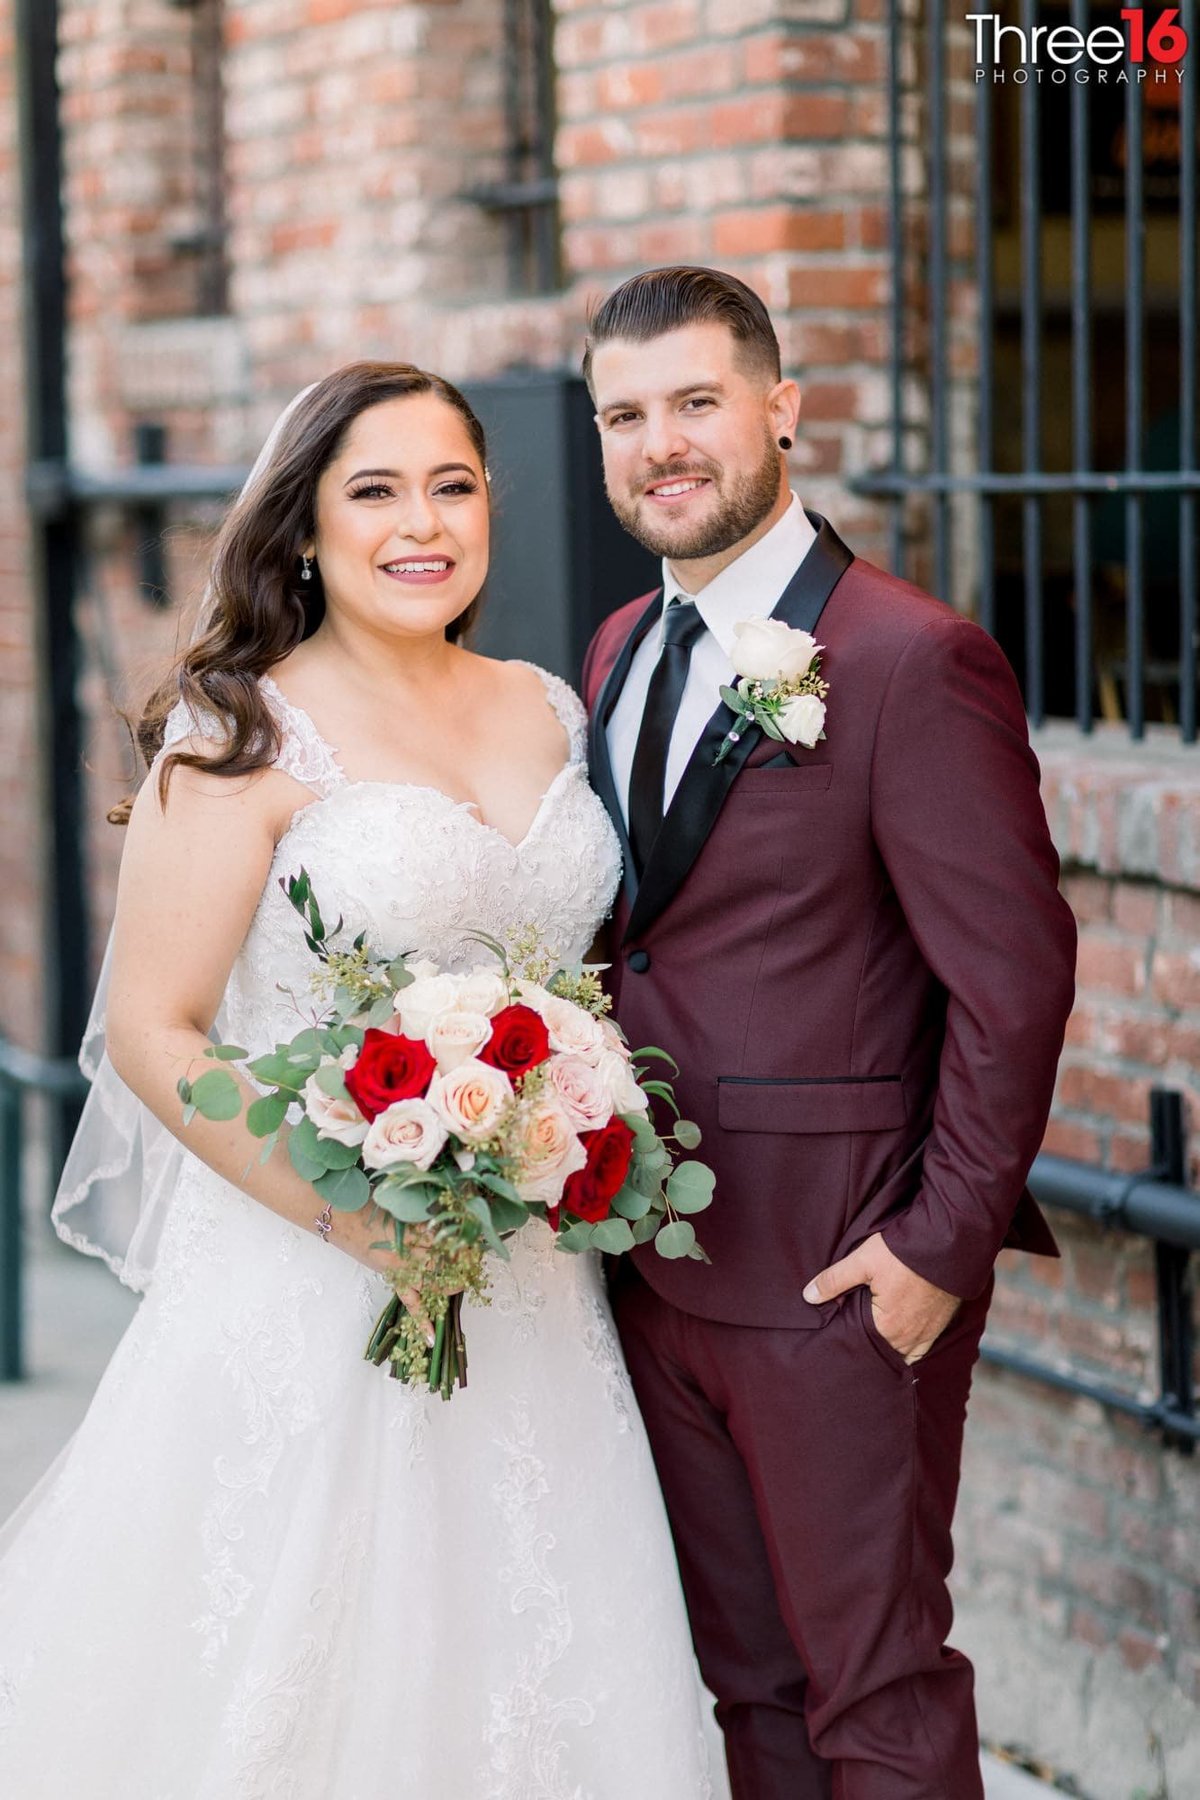 Bride and Groom pose for photos in downtown urban area of Fullerton with brick background